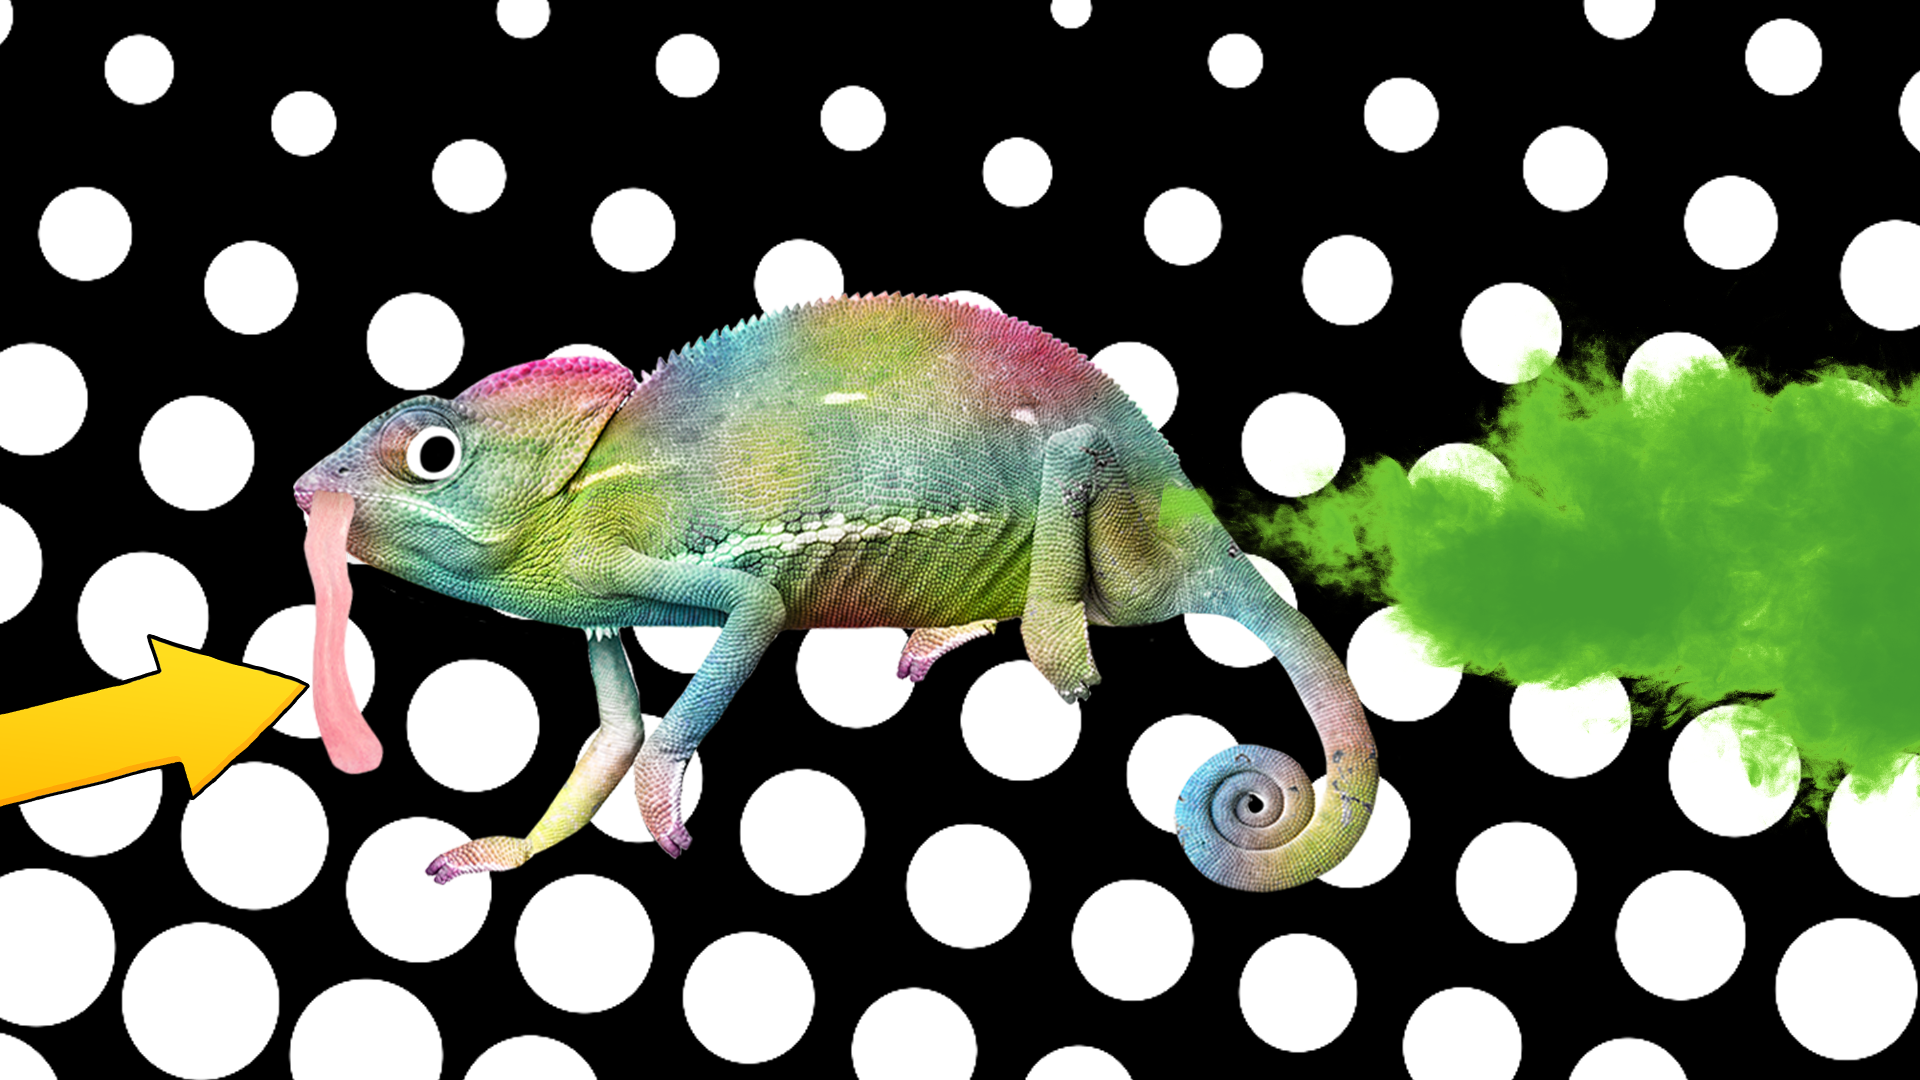 Beano chameleon with arrow and fart cloud on spotted background